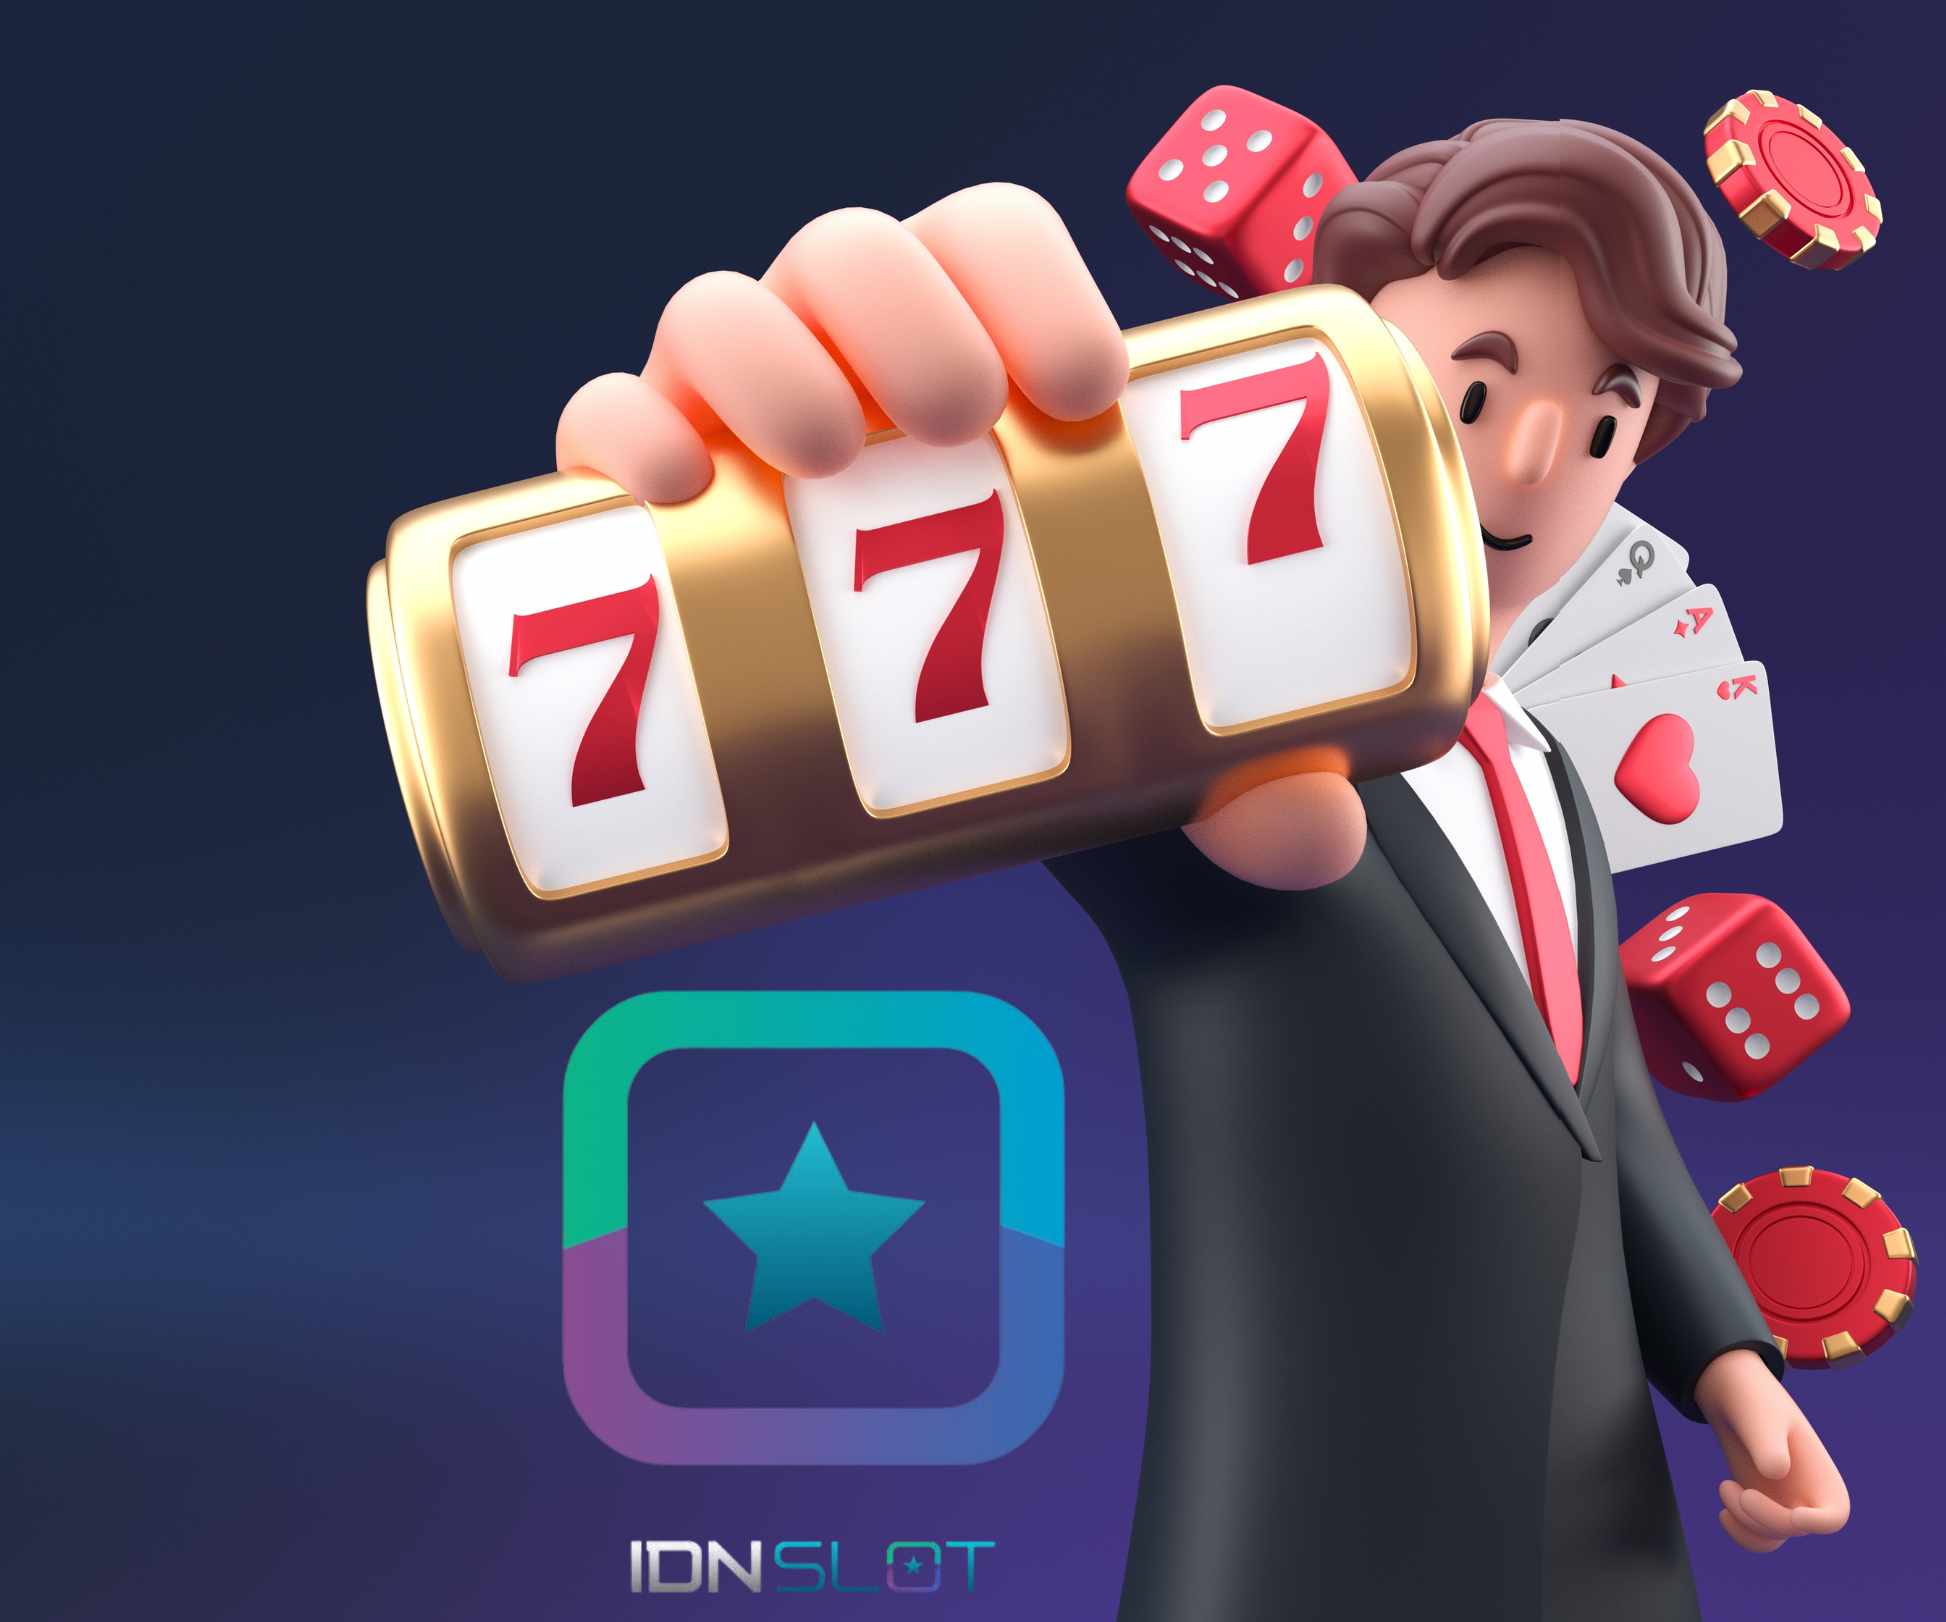 Idn Play is the slot playing site of the future